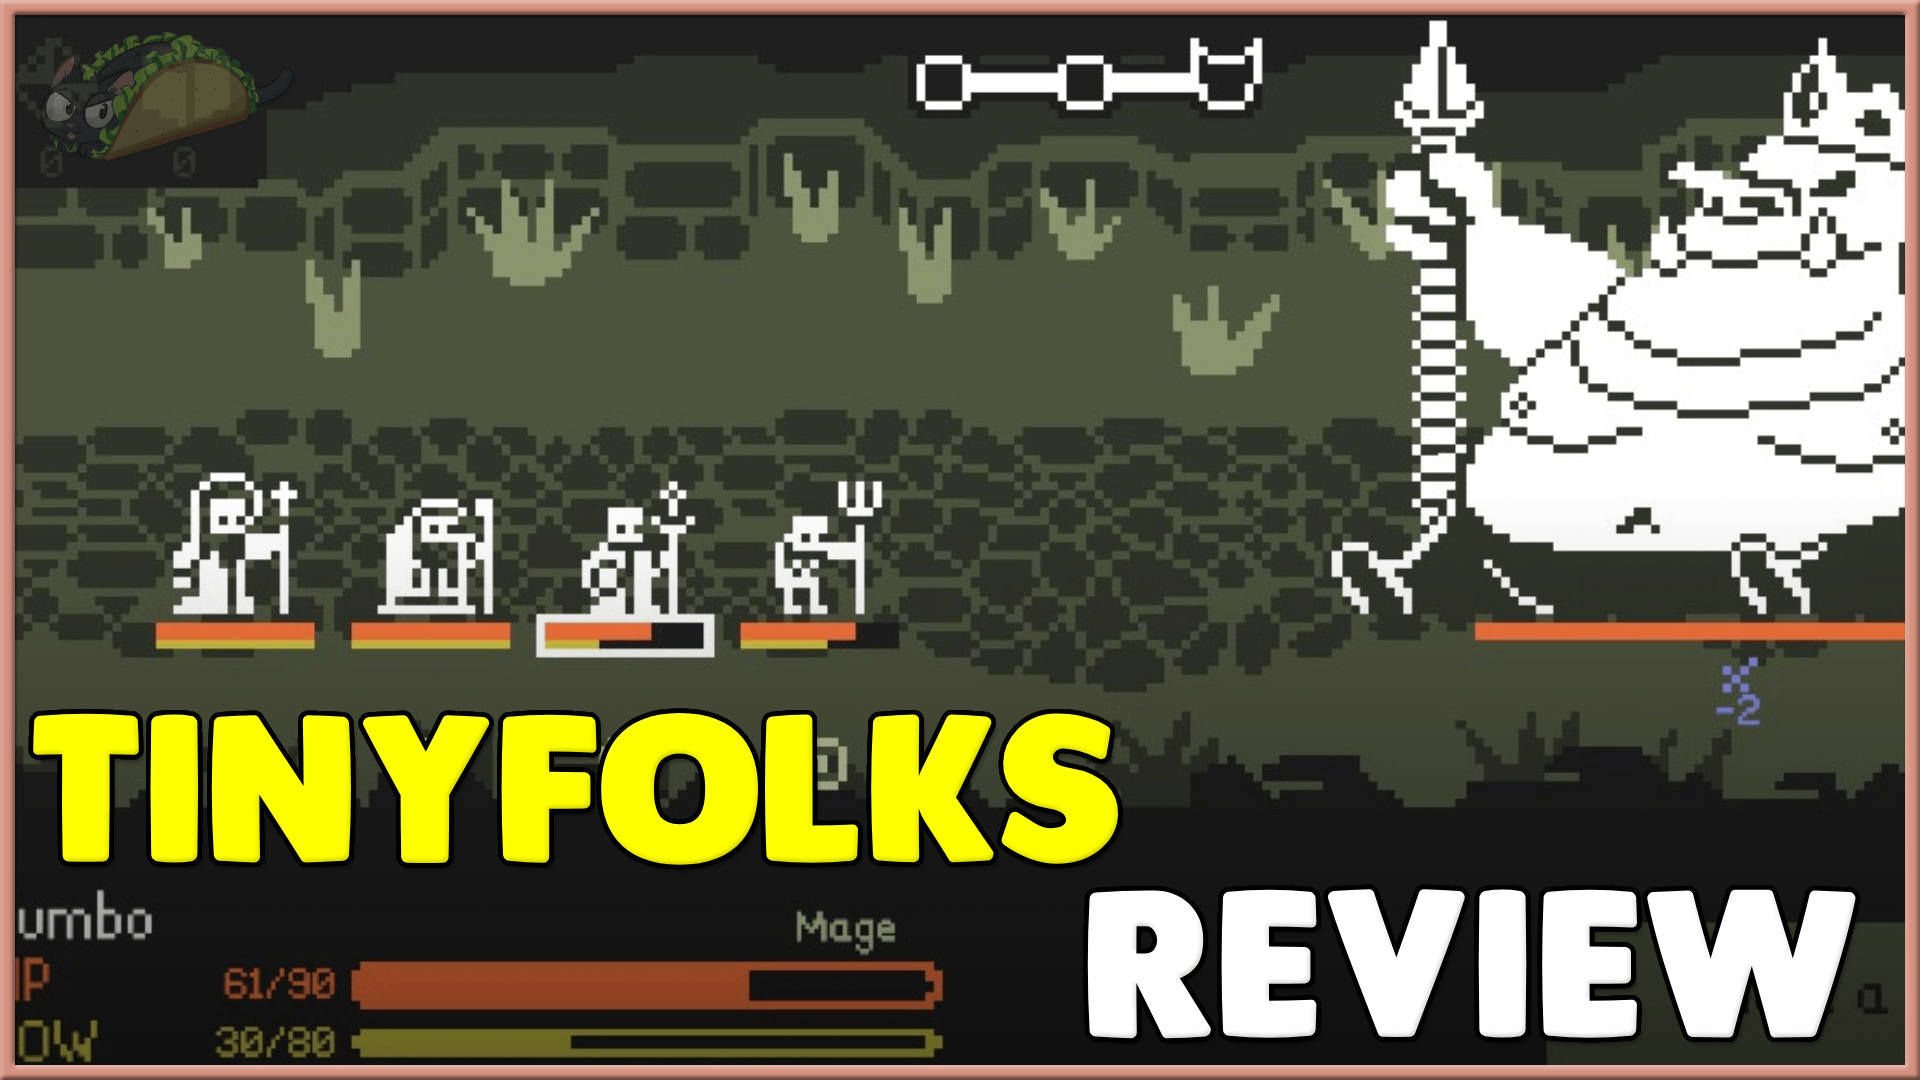 Tinyfolks Review on Steam